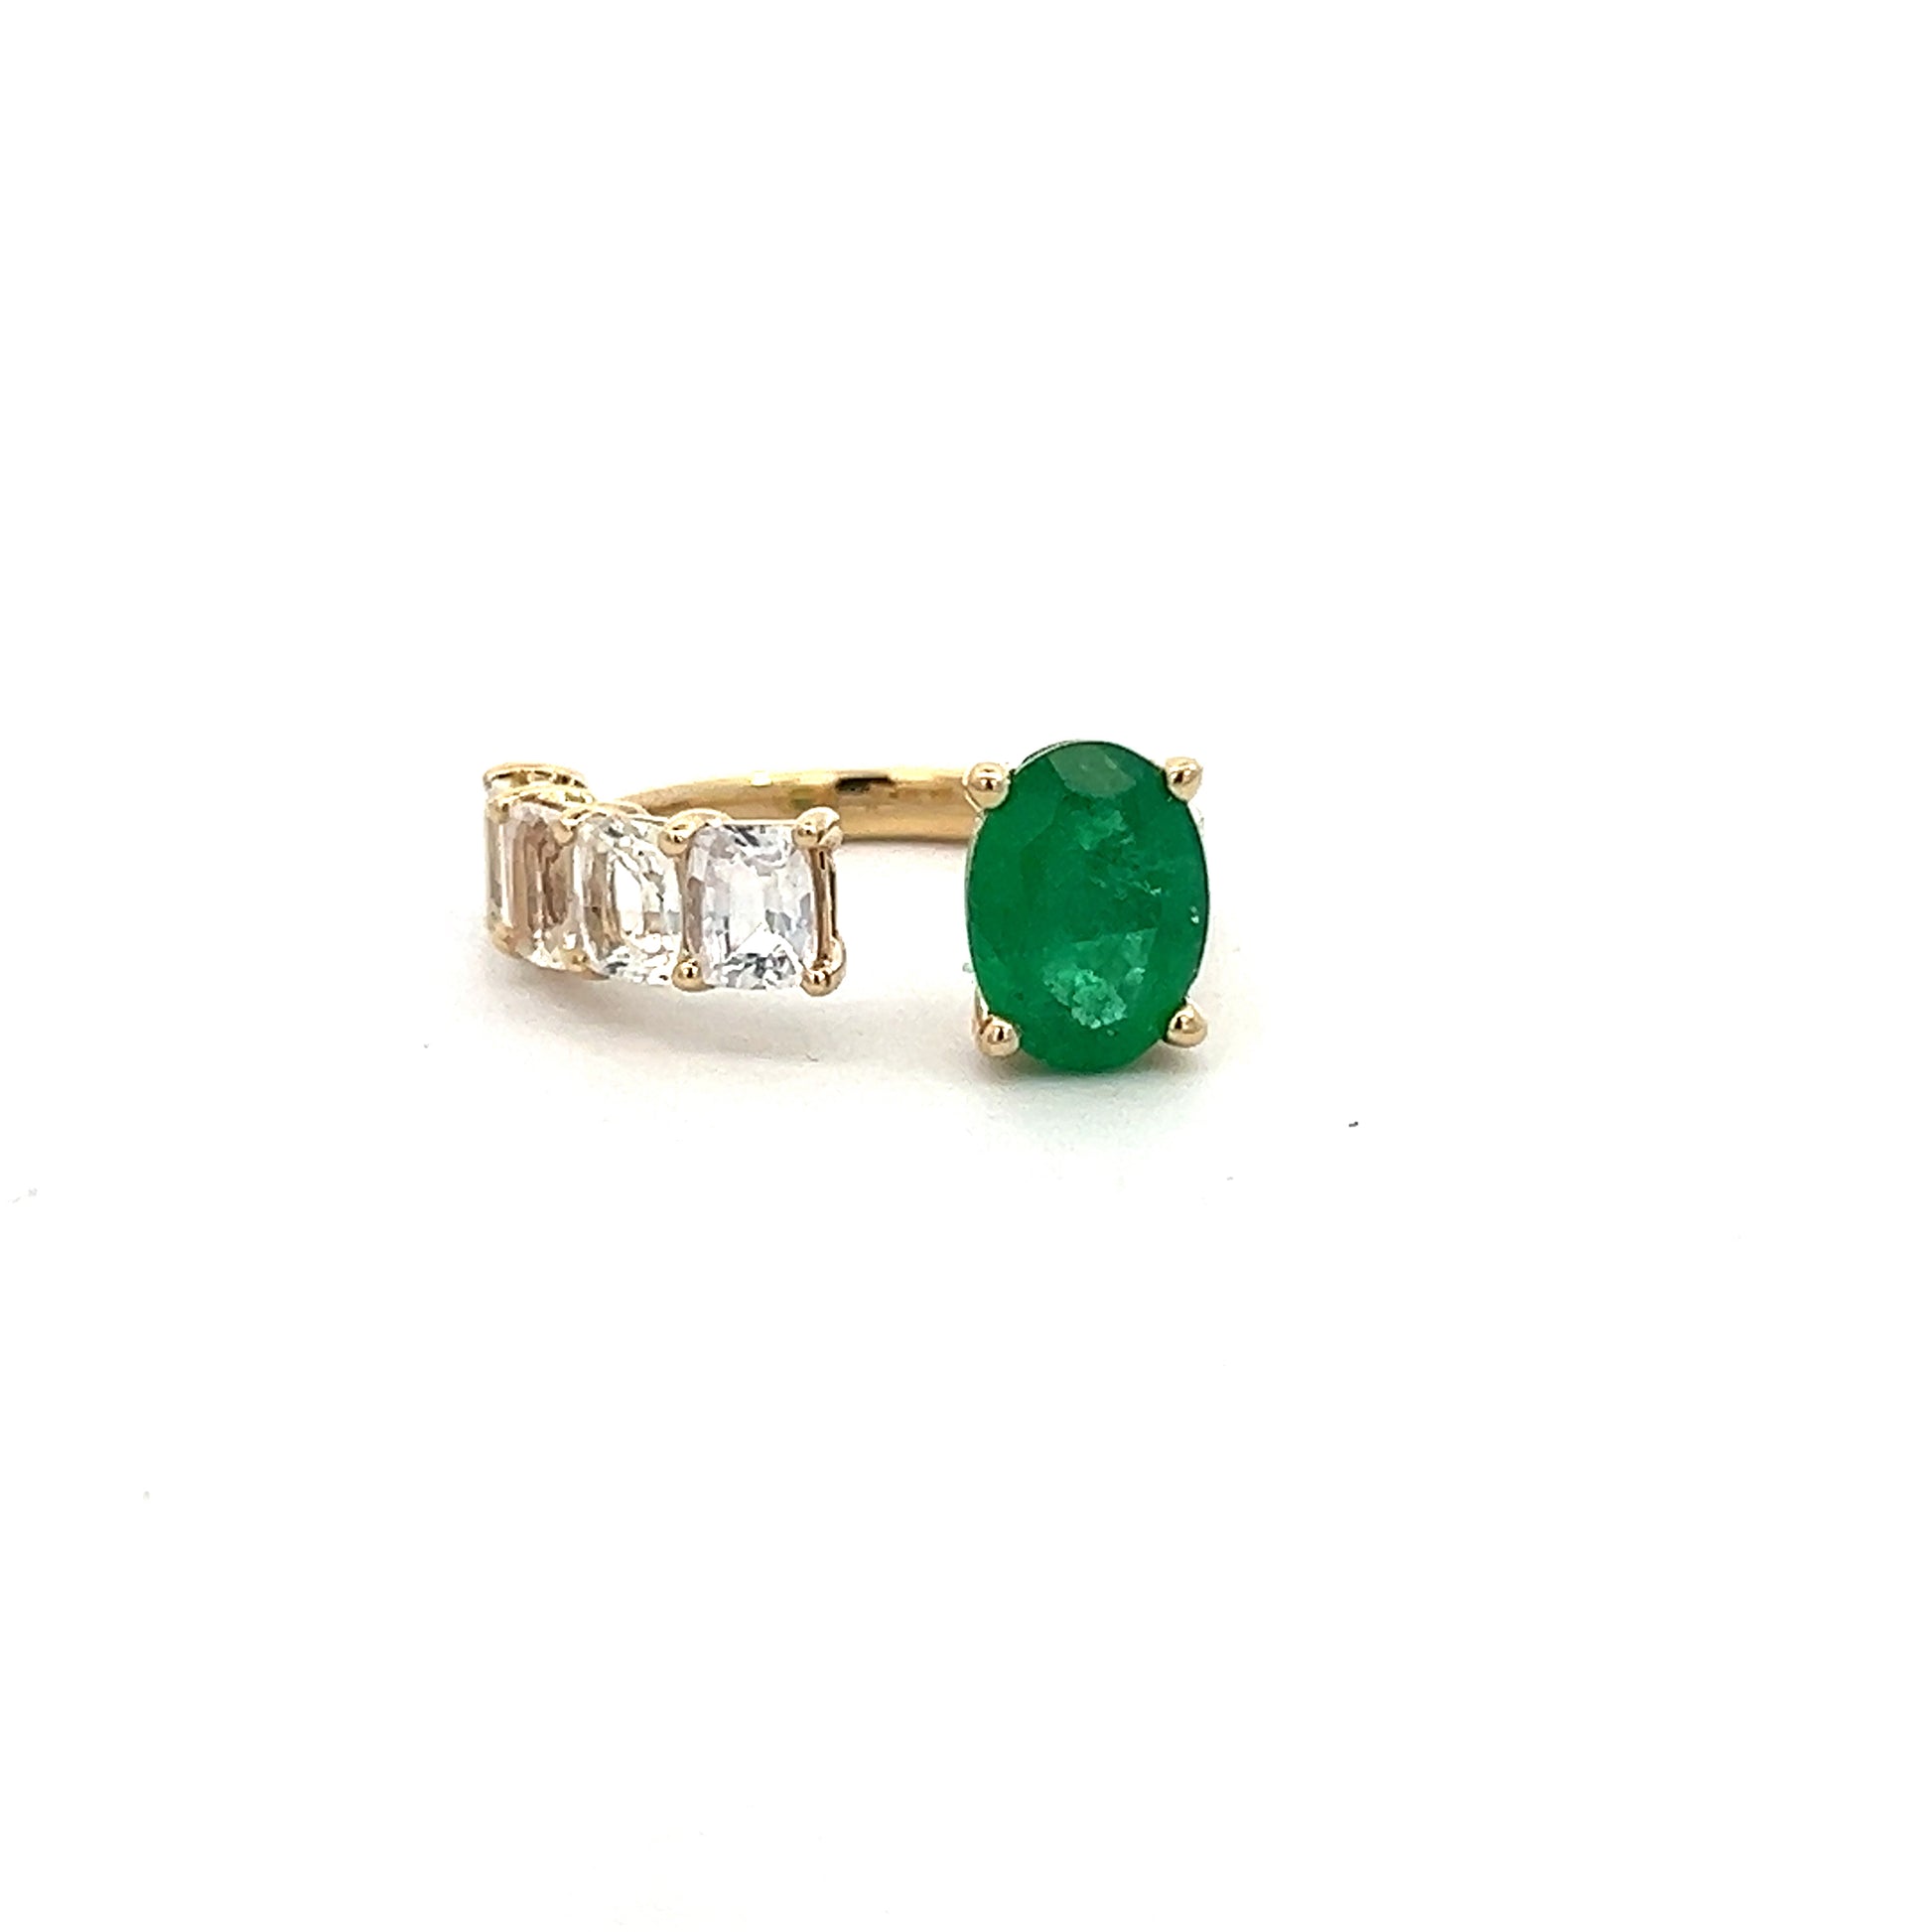 Natural Emerald and White Sapphire Ring 6.5 14k Y Gold 4.05 TCW Certified $4,950 310640